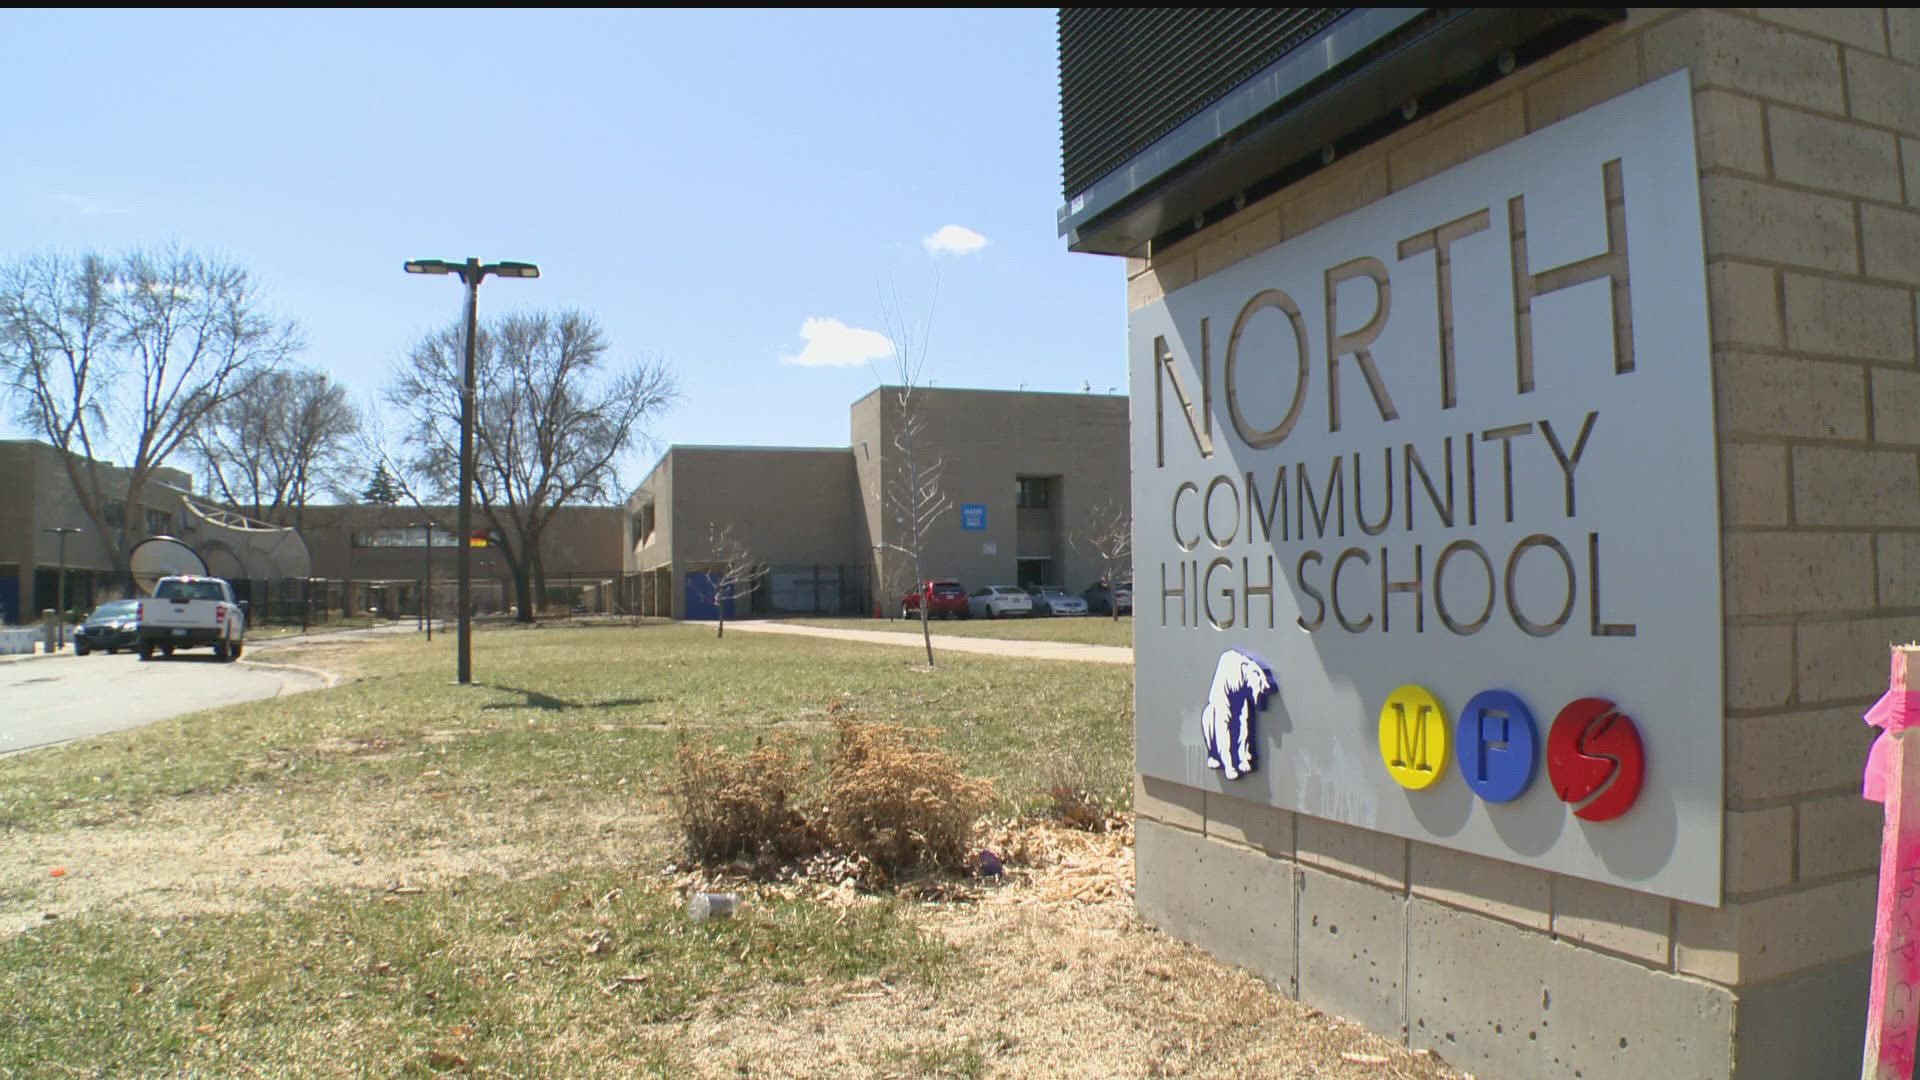 According to Minneapolis North High School, the 42 minutes added to school days to make up for the MPS teachers strike would put them over MN's hour requirements.